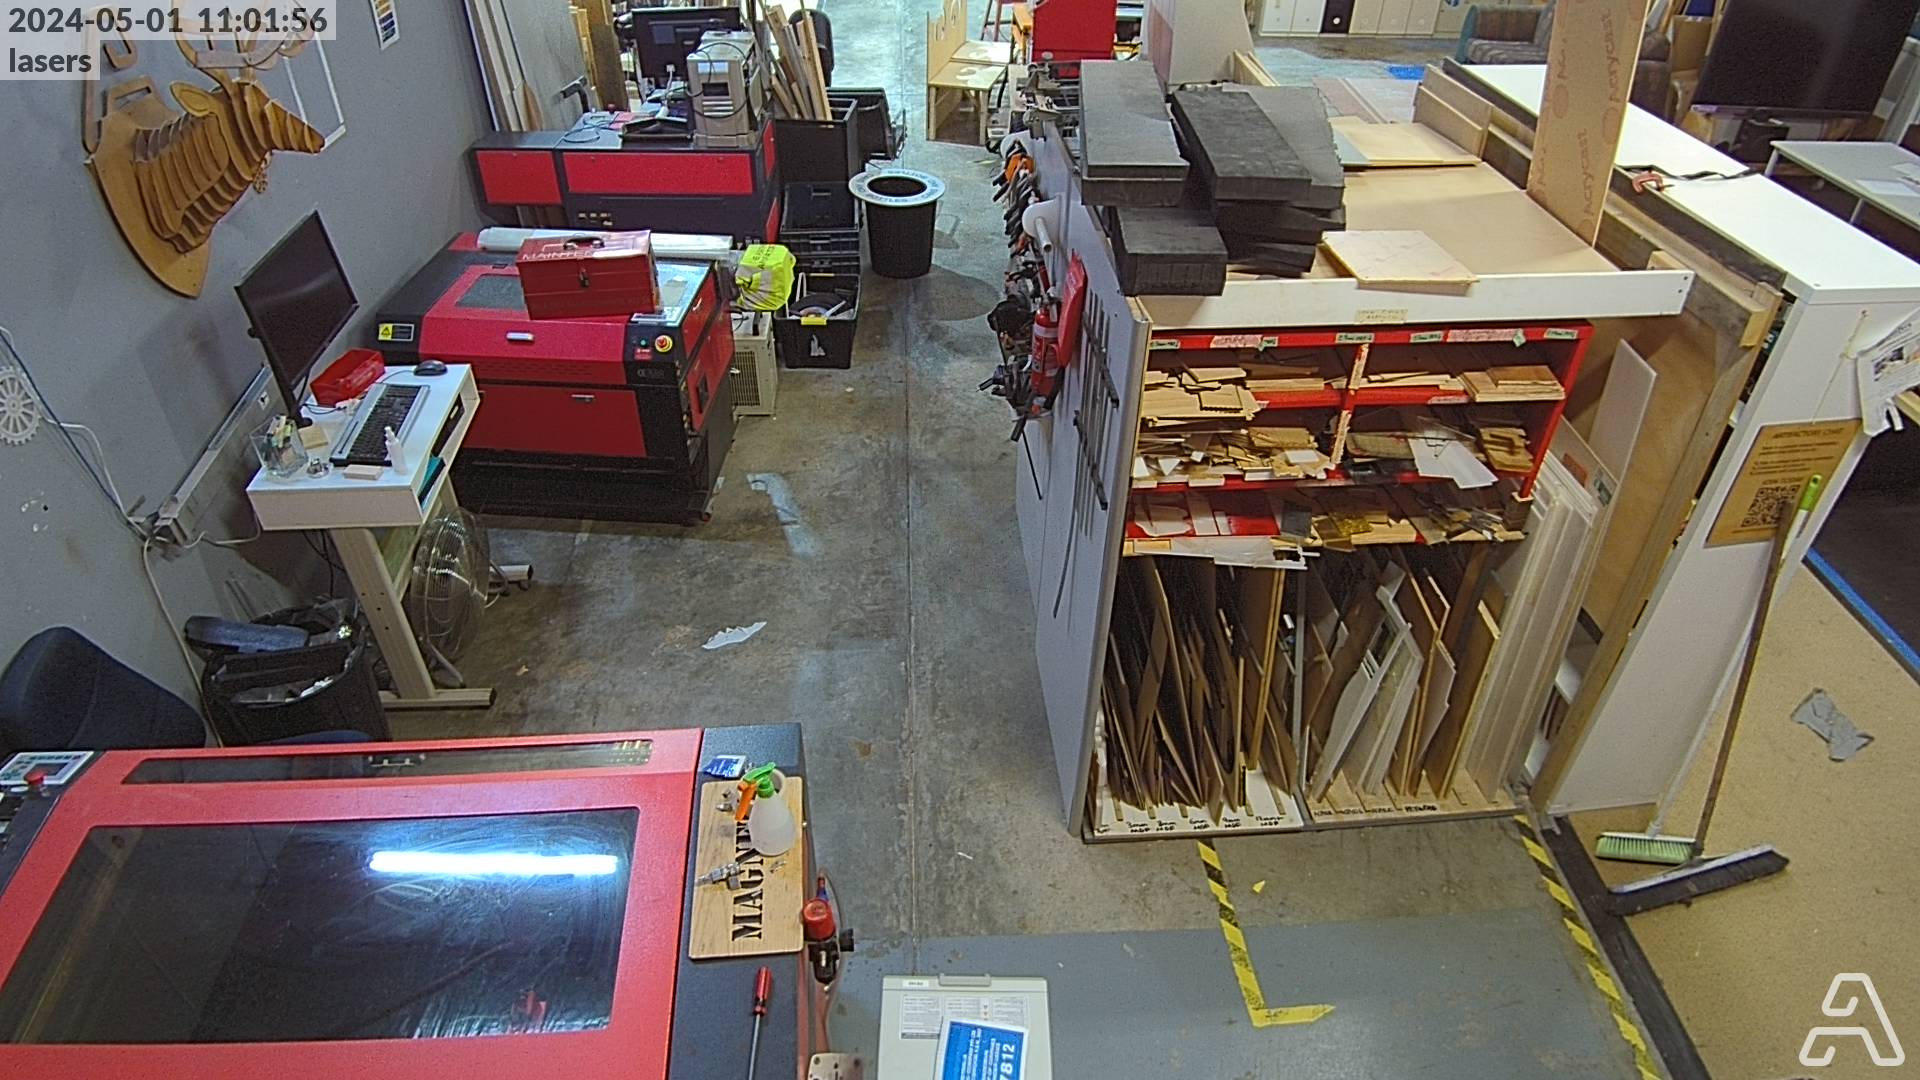 A view of the laser cutters